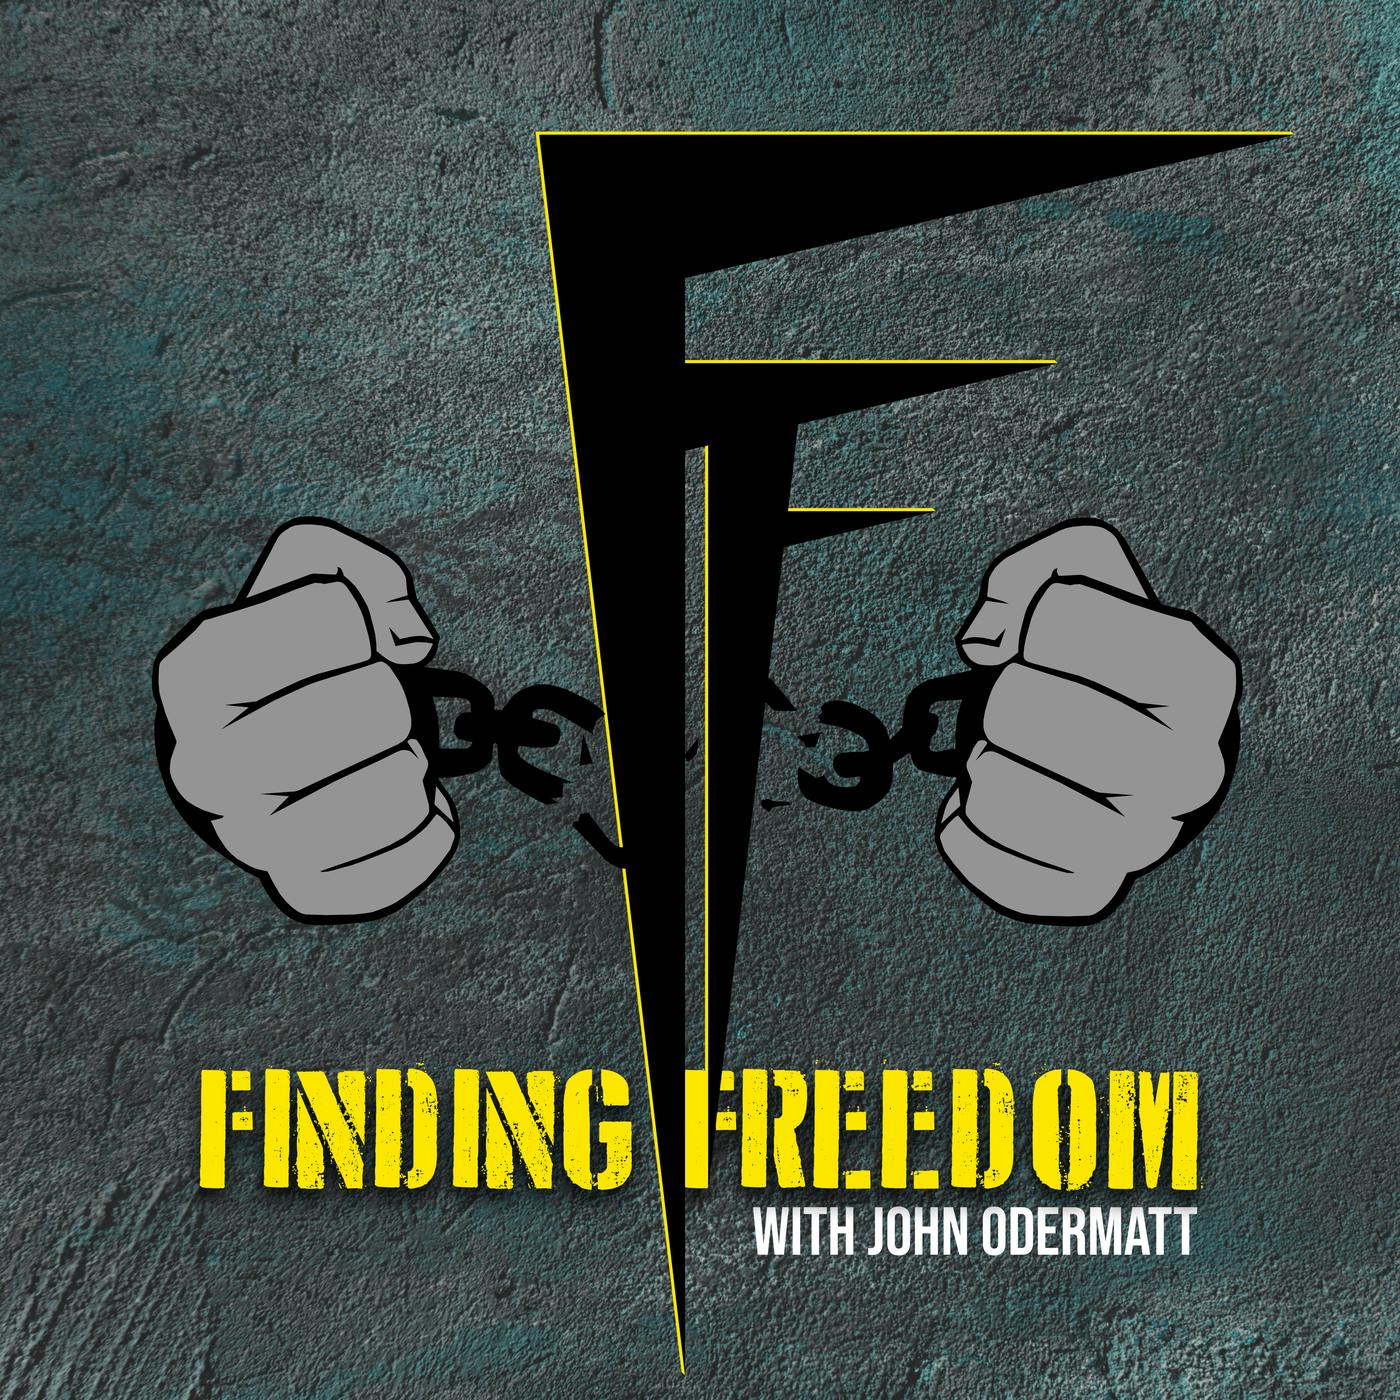 FF 441: The Libertarian Case for Donald Trump with Jeremy Kauffman